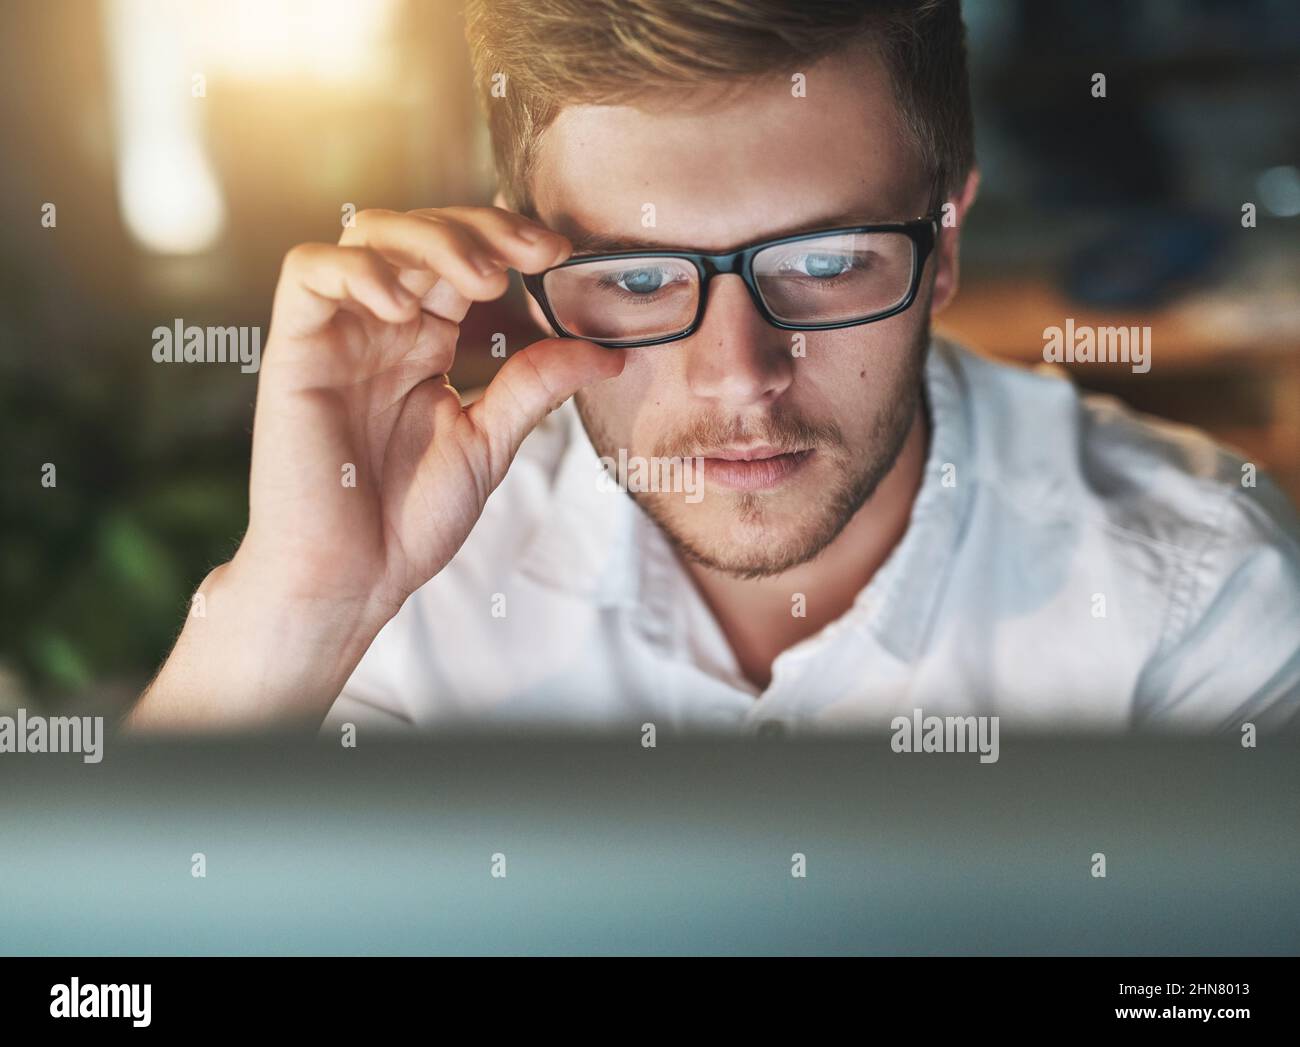 Am I seeing this right. Shot of a young designer adjusting his glasses as he looks at his computer screen. Stock Photo